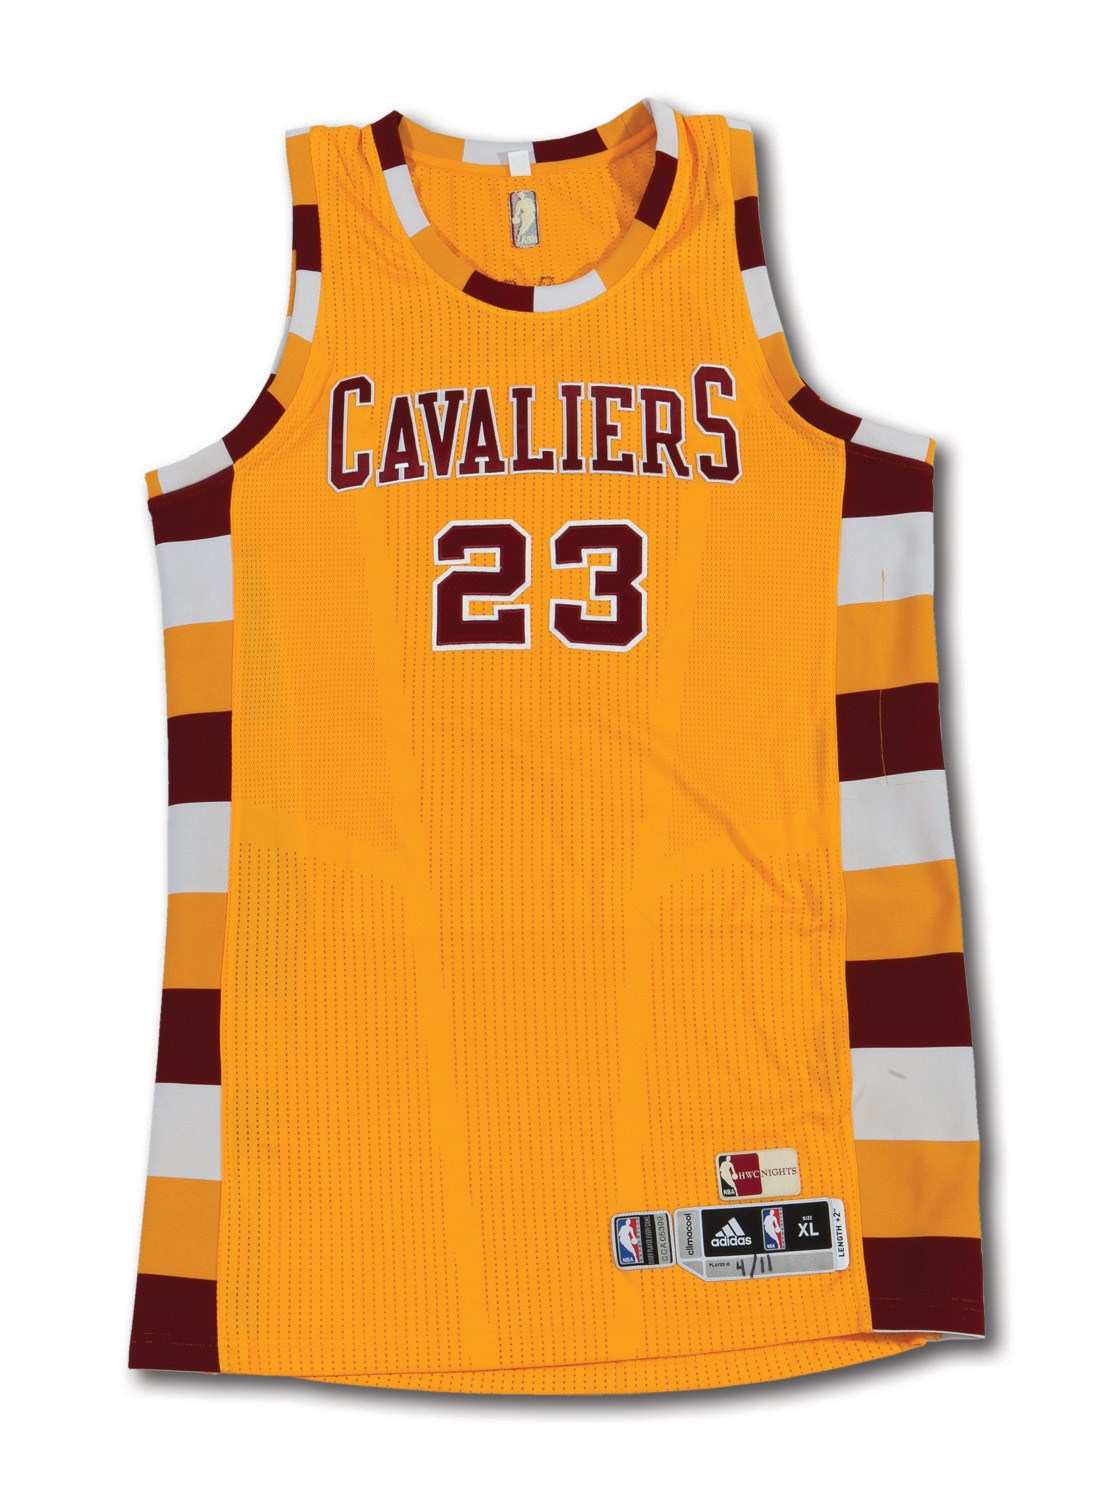 2014-15 LeBron James Game Used Cleveland Cavaliers Road Jersey